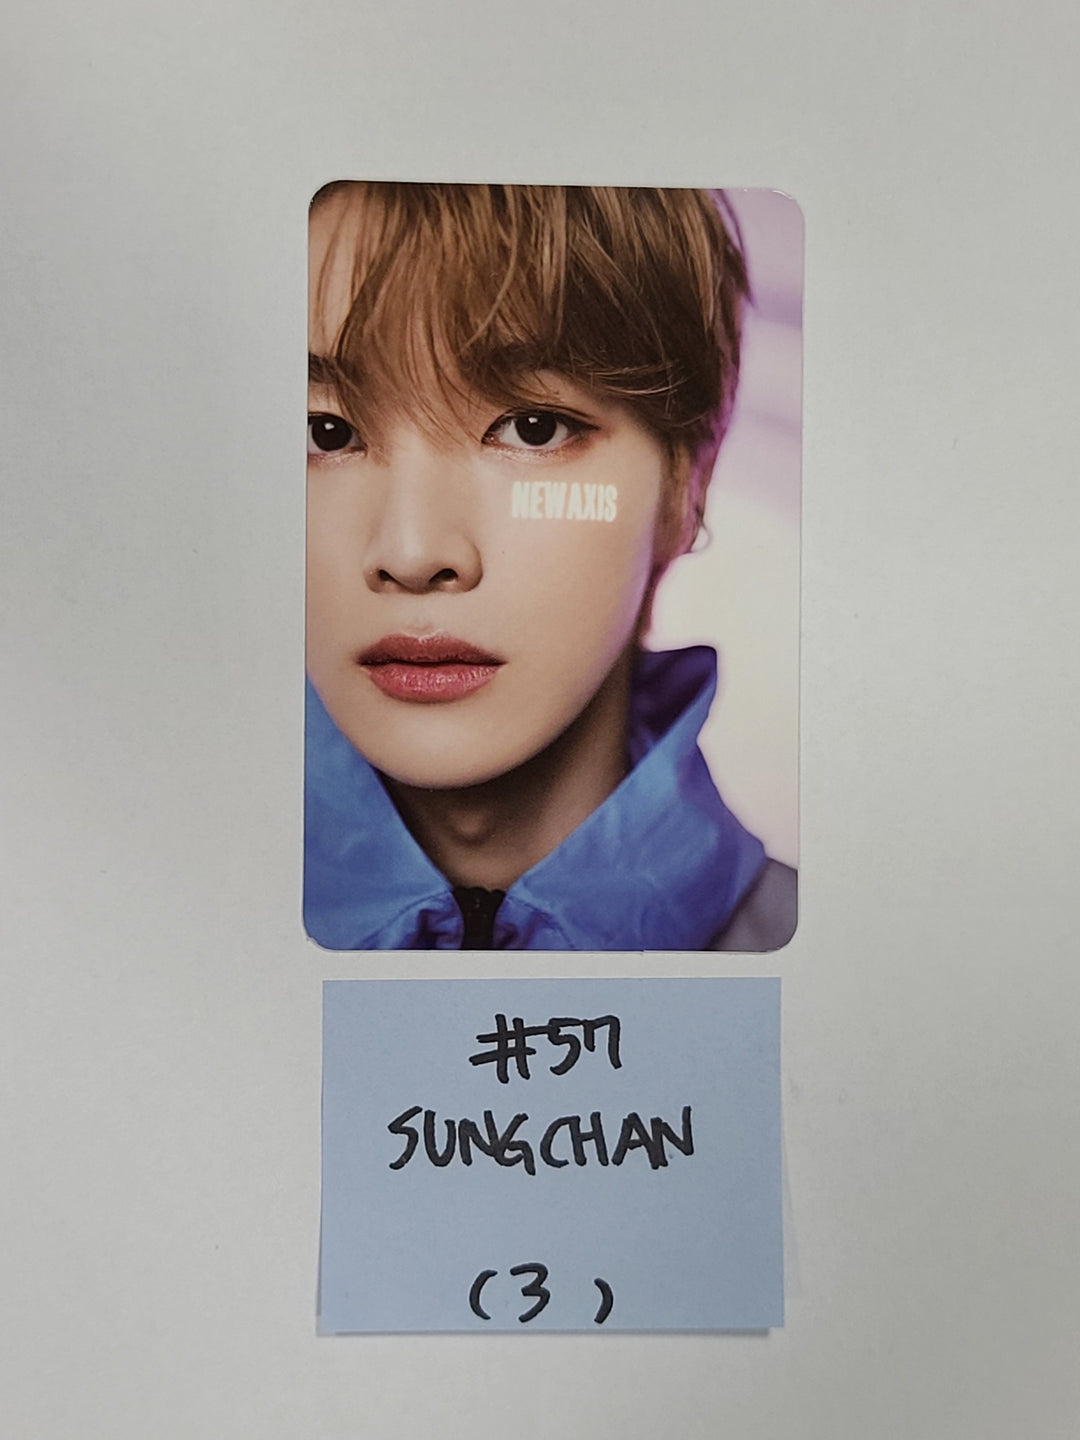 NCT Universe - SMTOWN Official ID Card, Photocard (3)